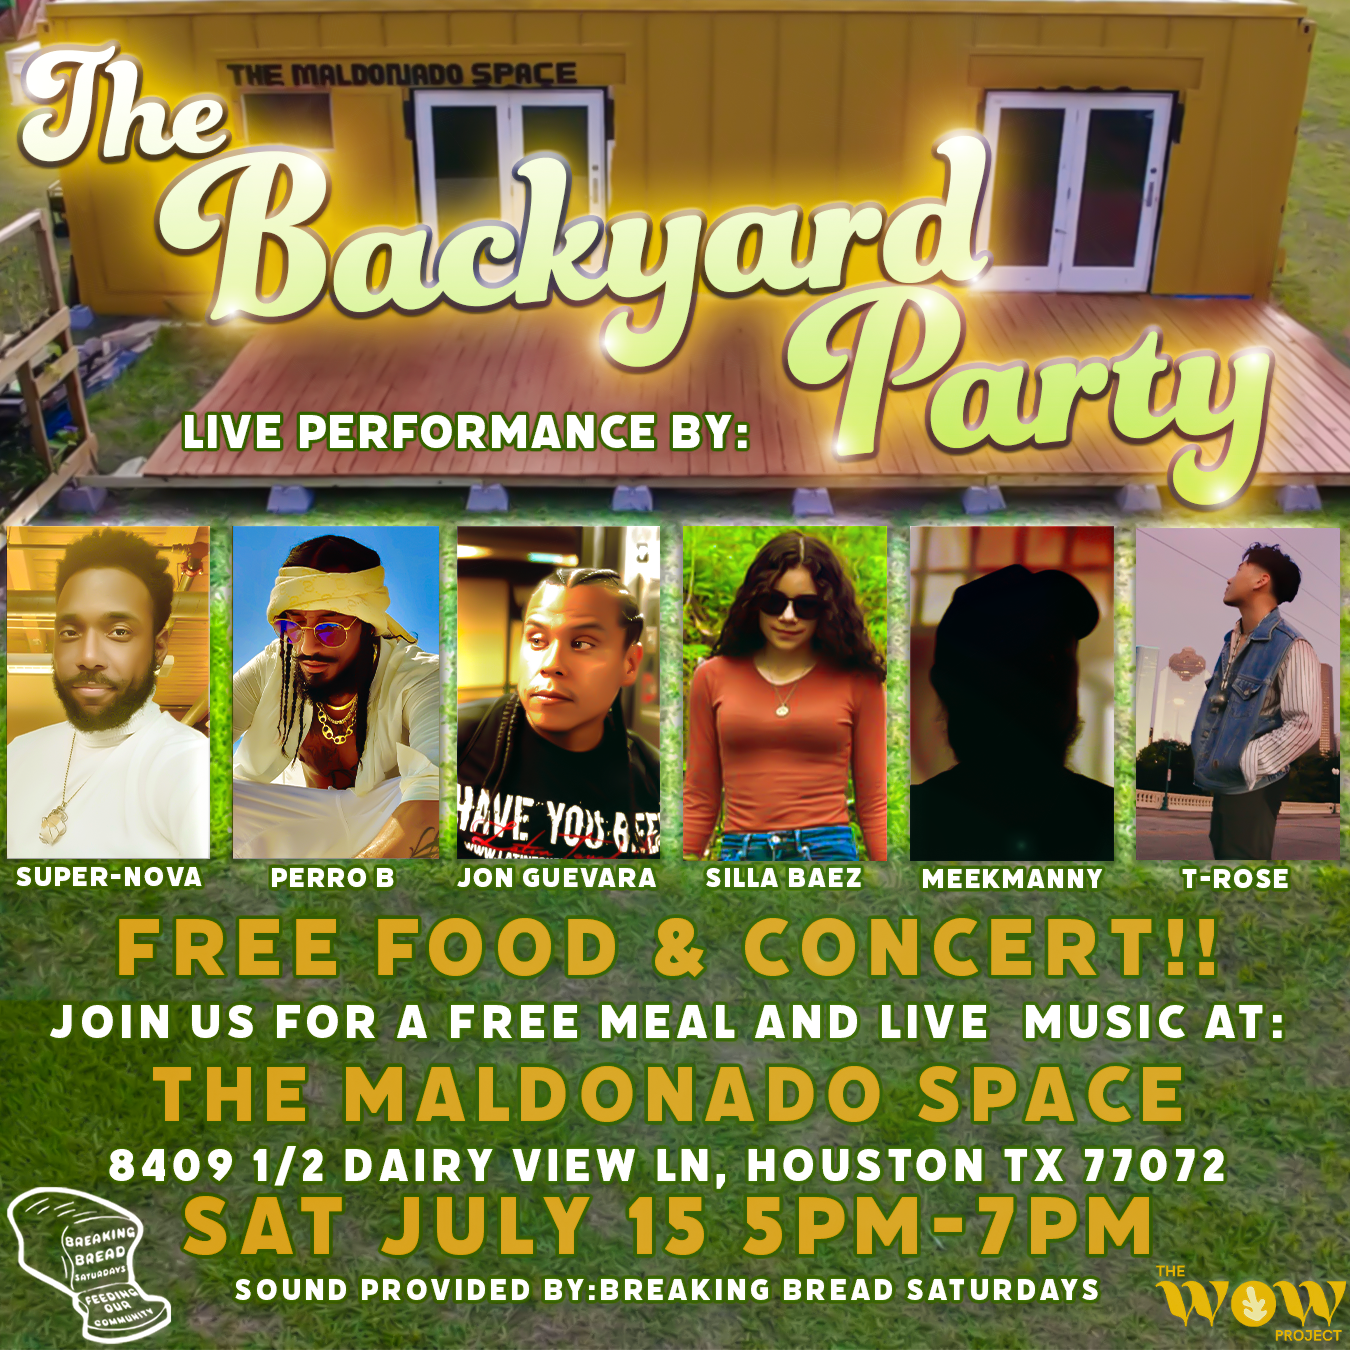 The Backyard Party Wow Project and Breaking Bread Saturdays